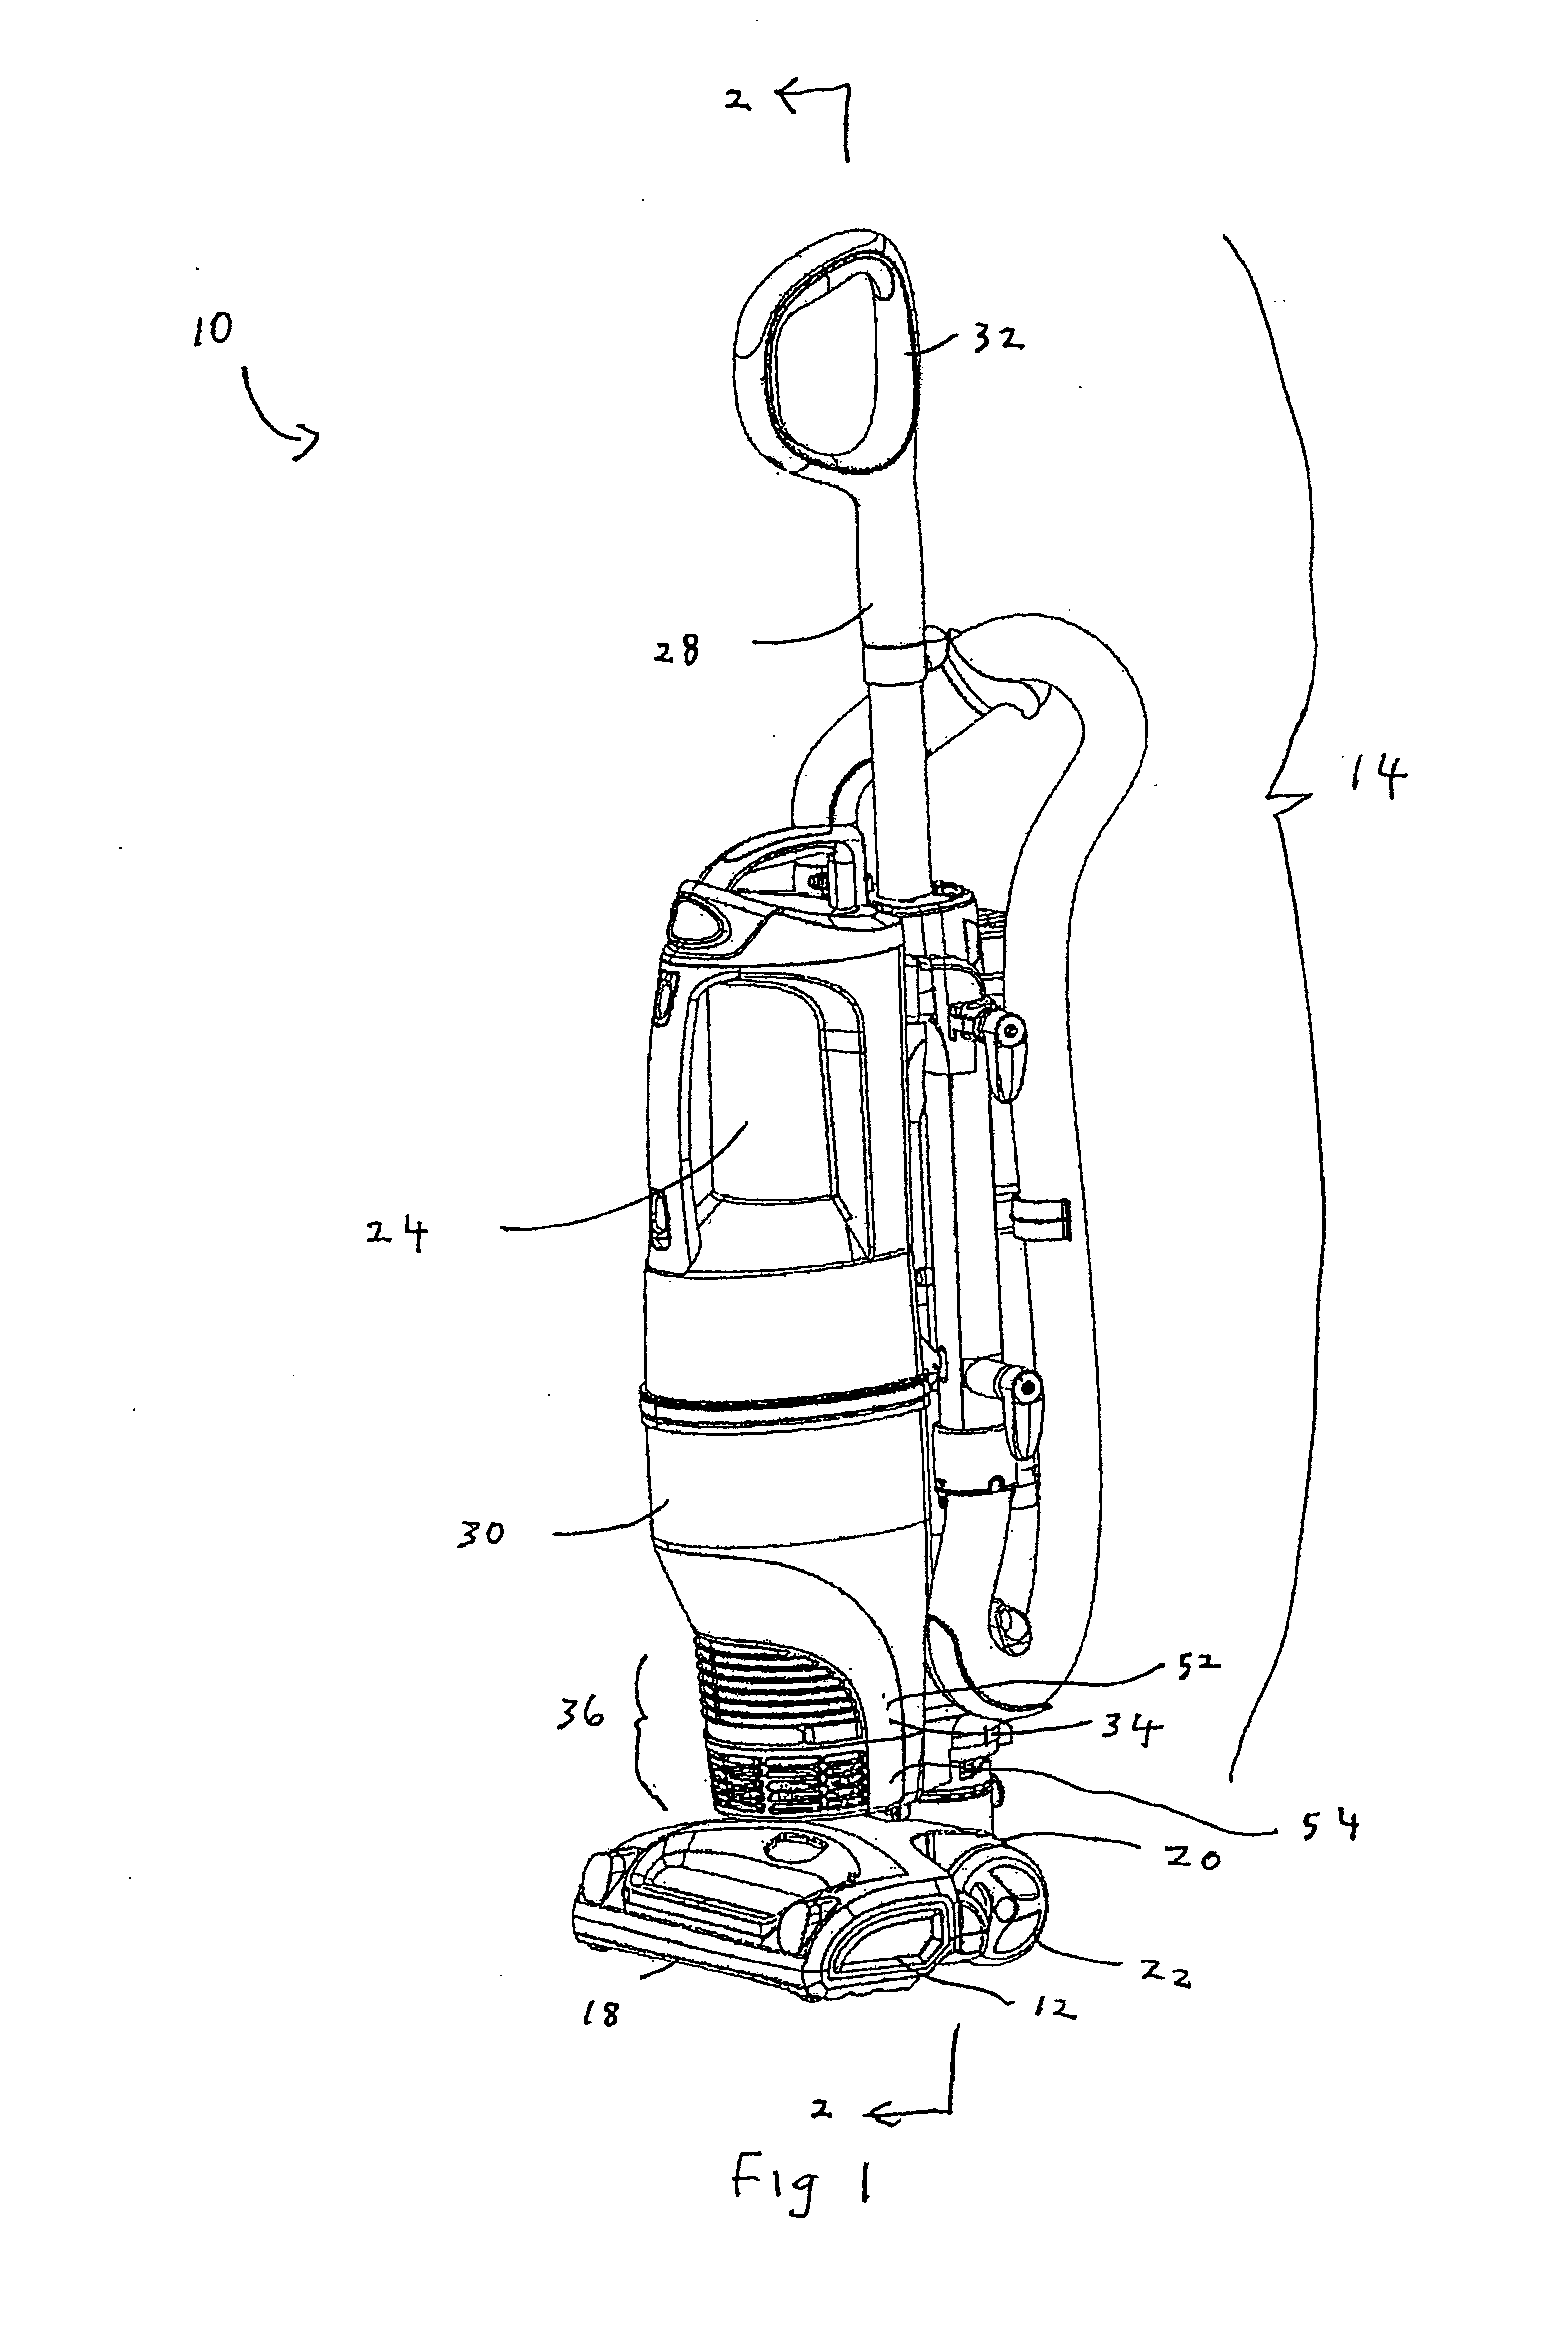 Surface cleaning apparatus with openable filter compartment